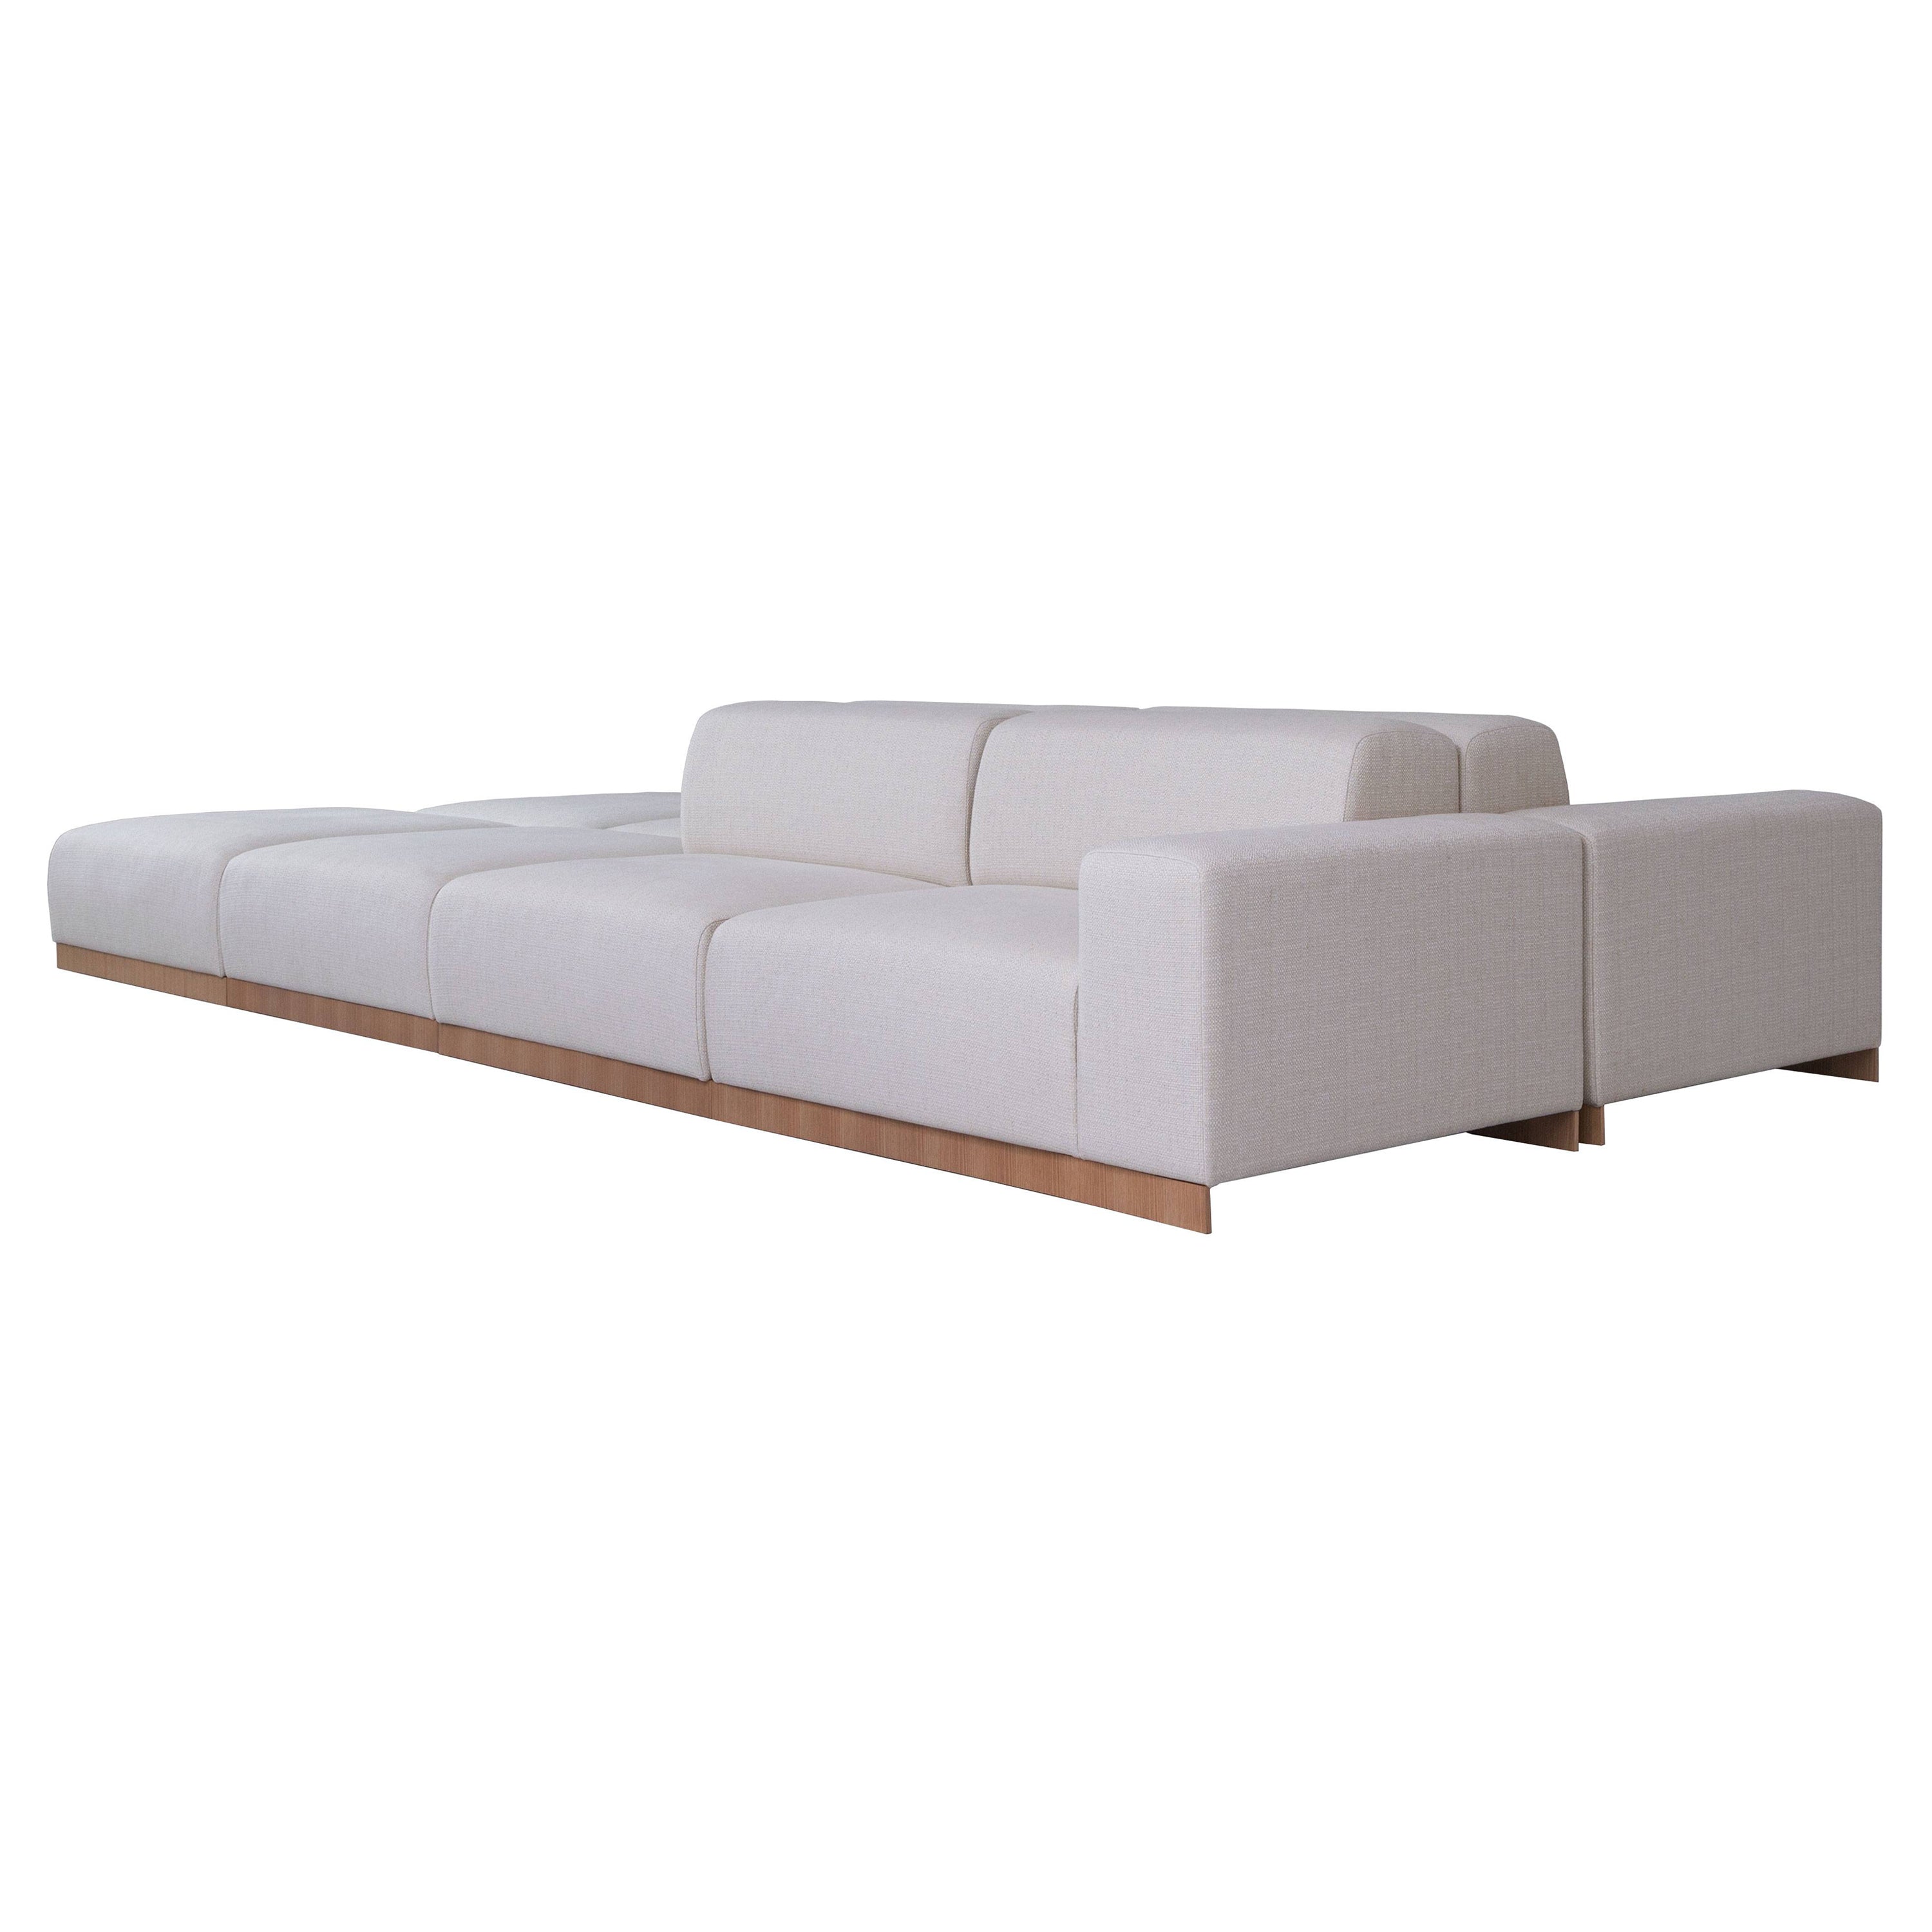 Frente Modular Sofa | Buy By Interiors online at A+R